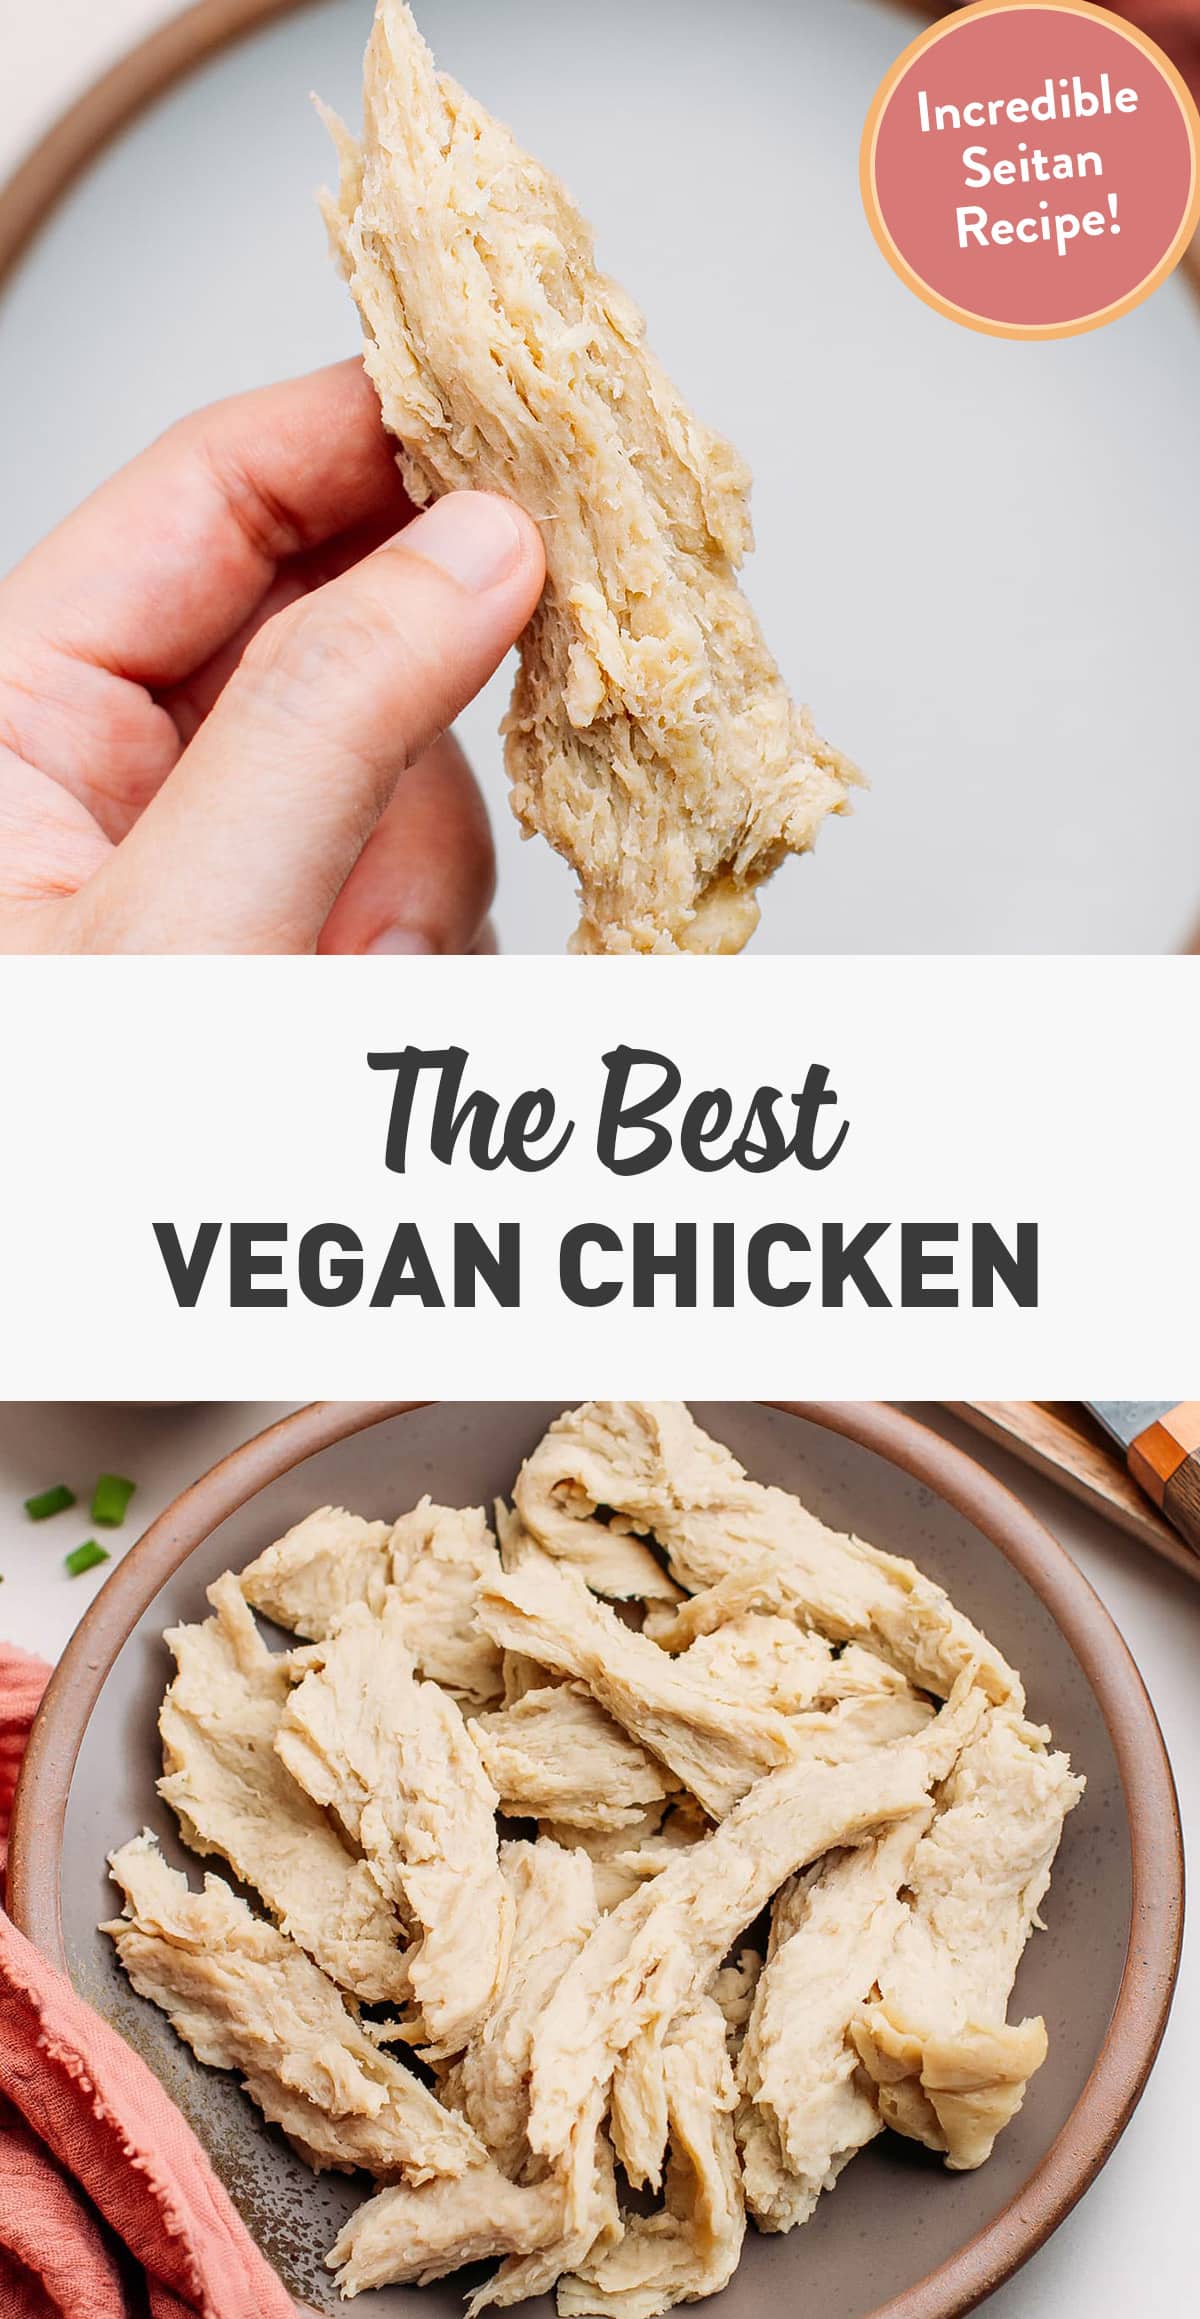 Amazing vegan chicken that has an incredible meaty texture! You will never believe it's vegan! Plus it's high in protein! #plantbased #chickn #vegan #seitan